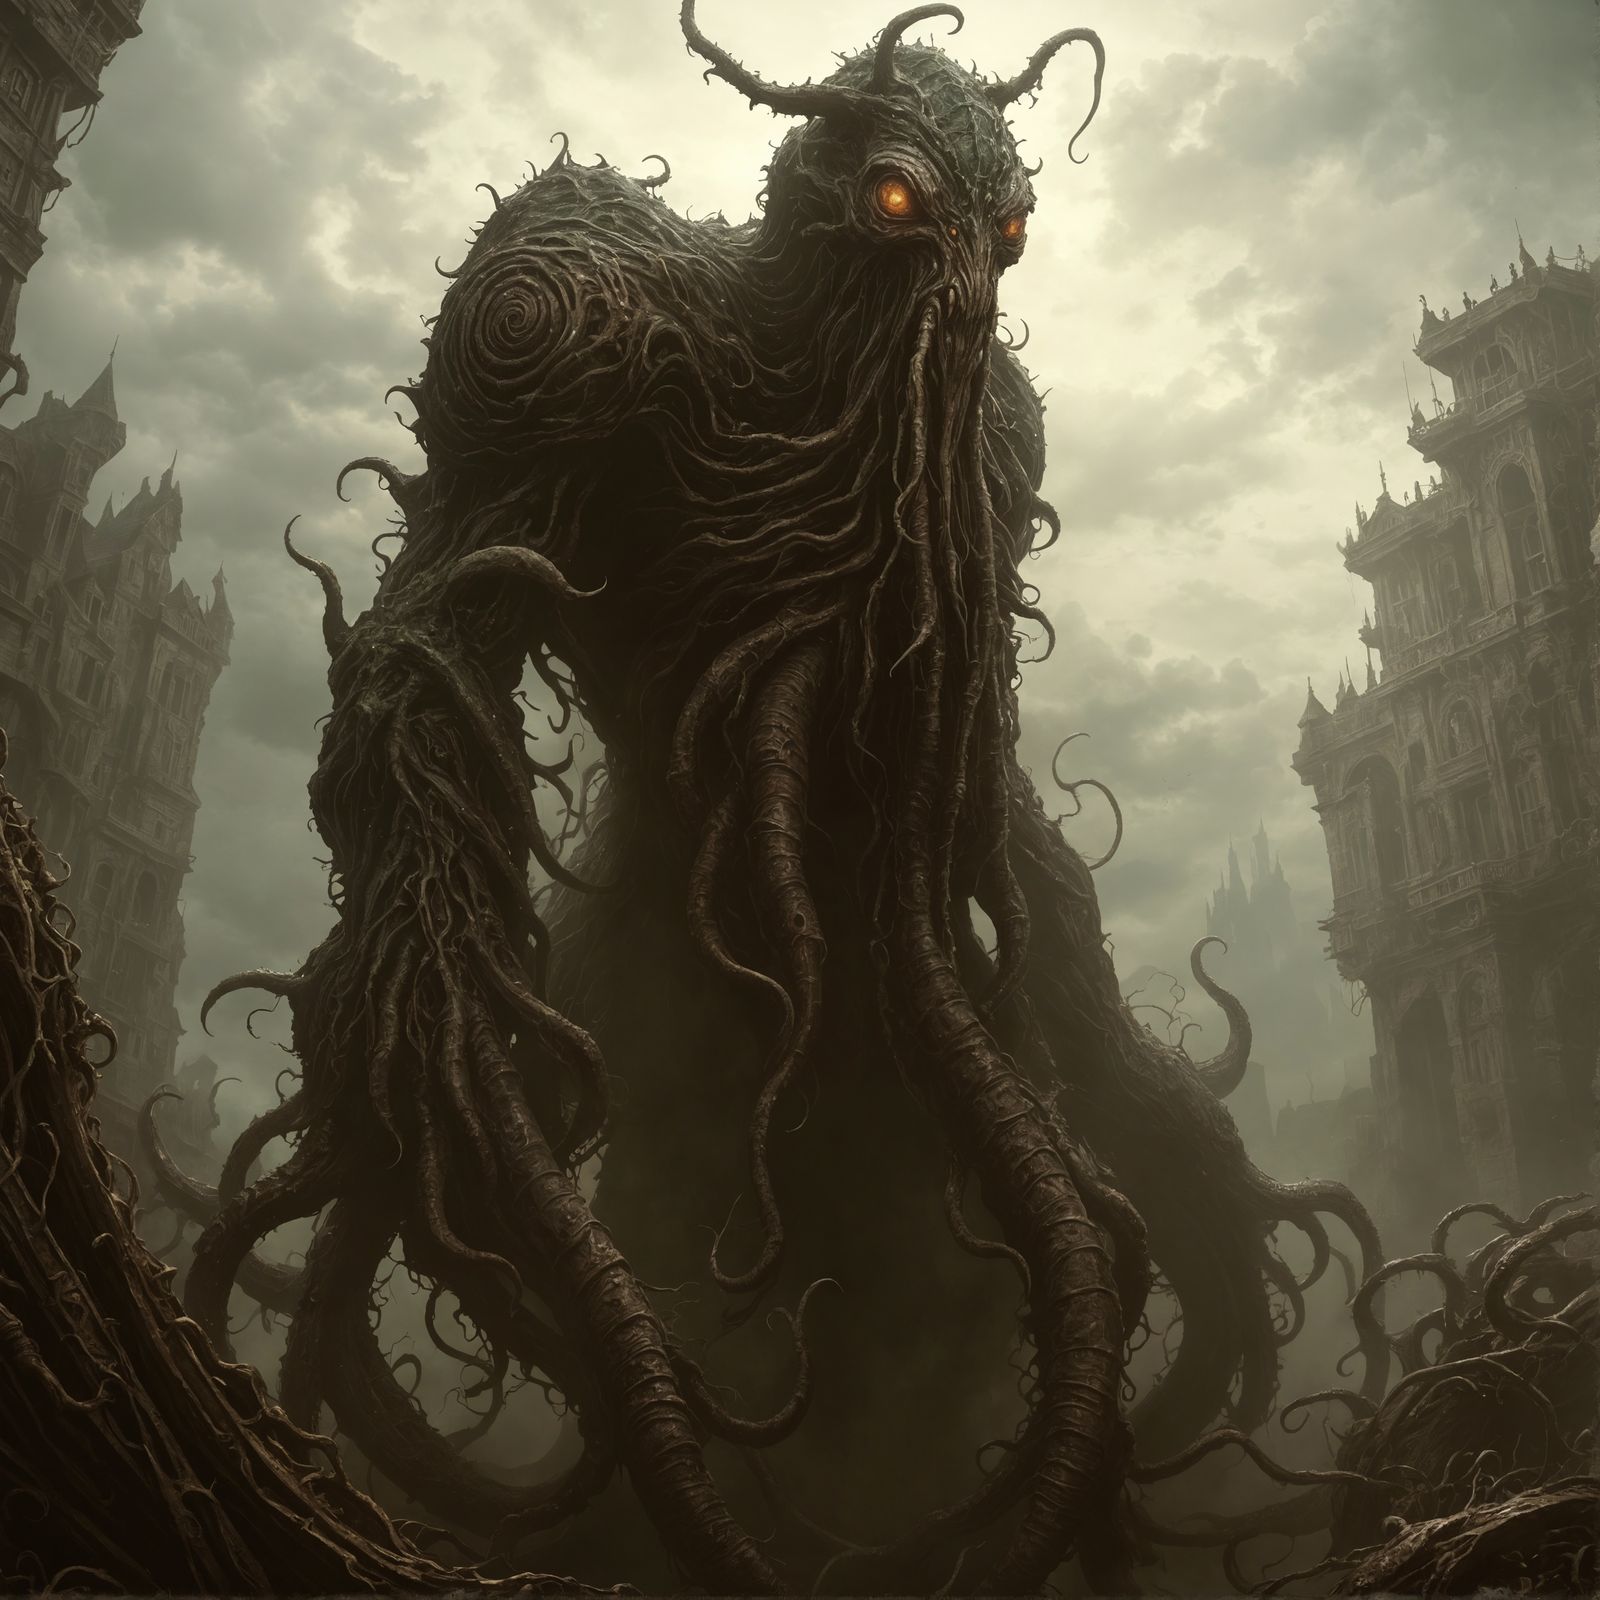 The World of Lovecraft